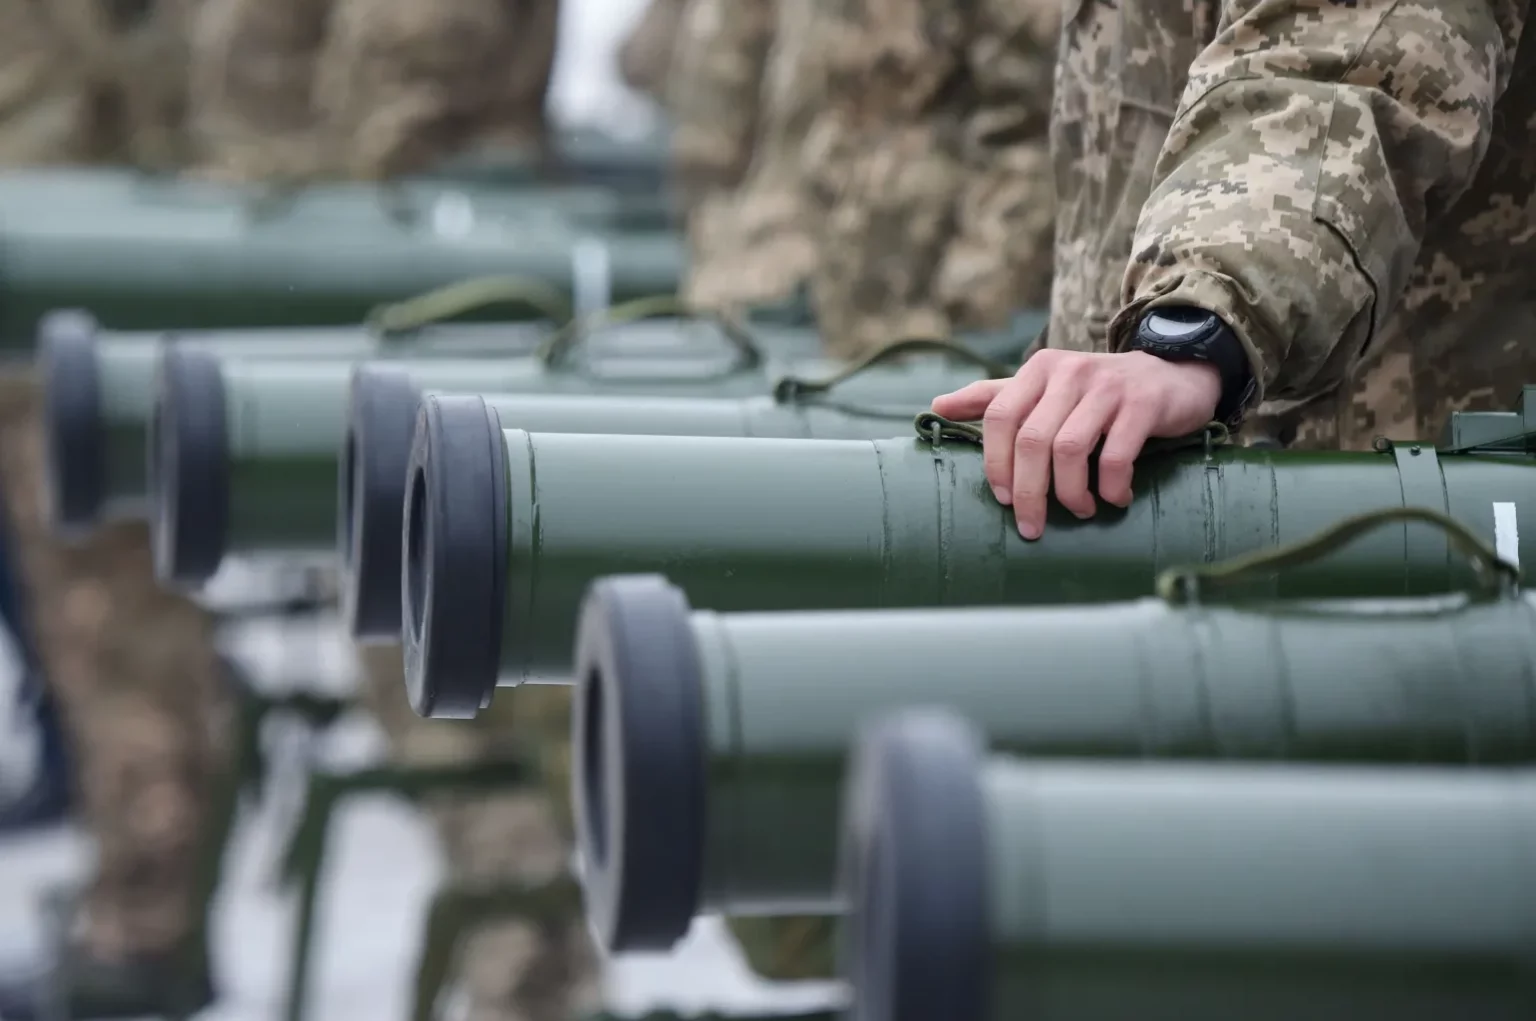 russia-accelerates-the-production-of-military-hardware-tenfold-amid-ukraine-war-report